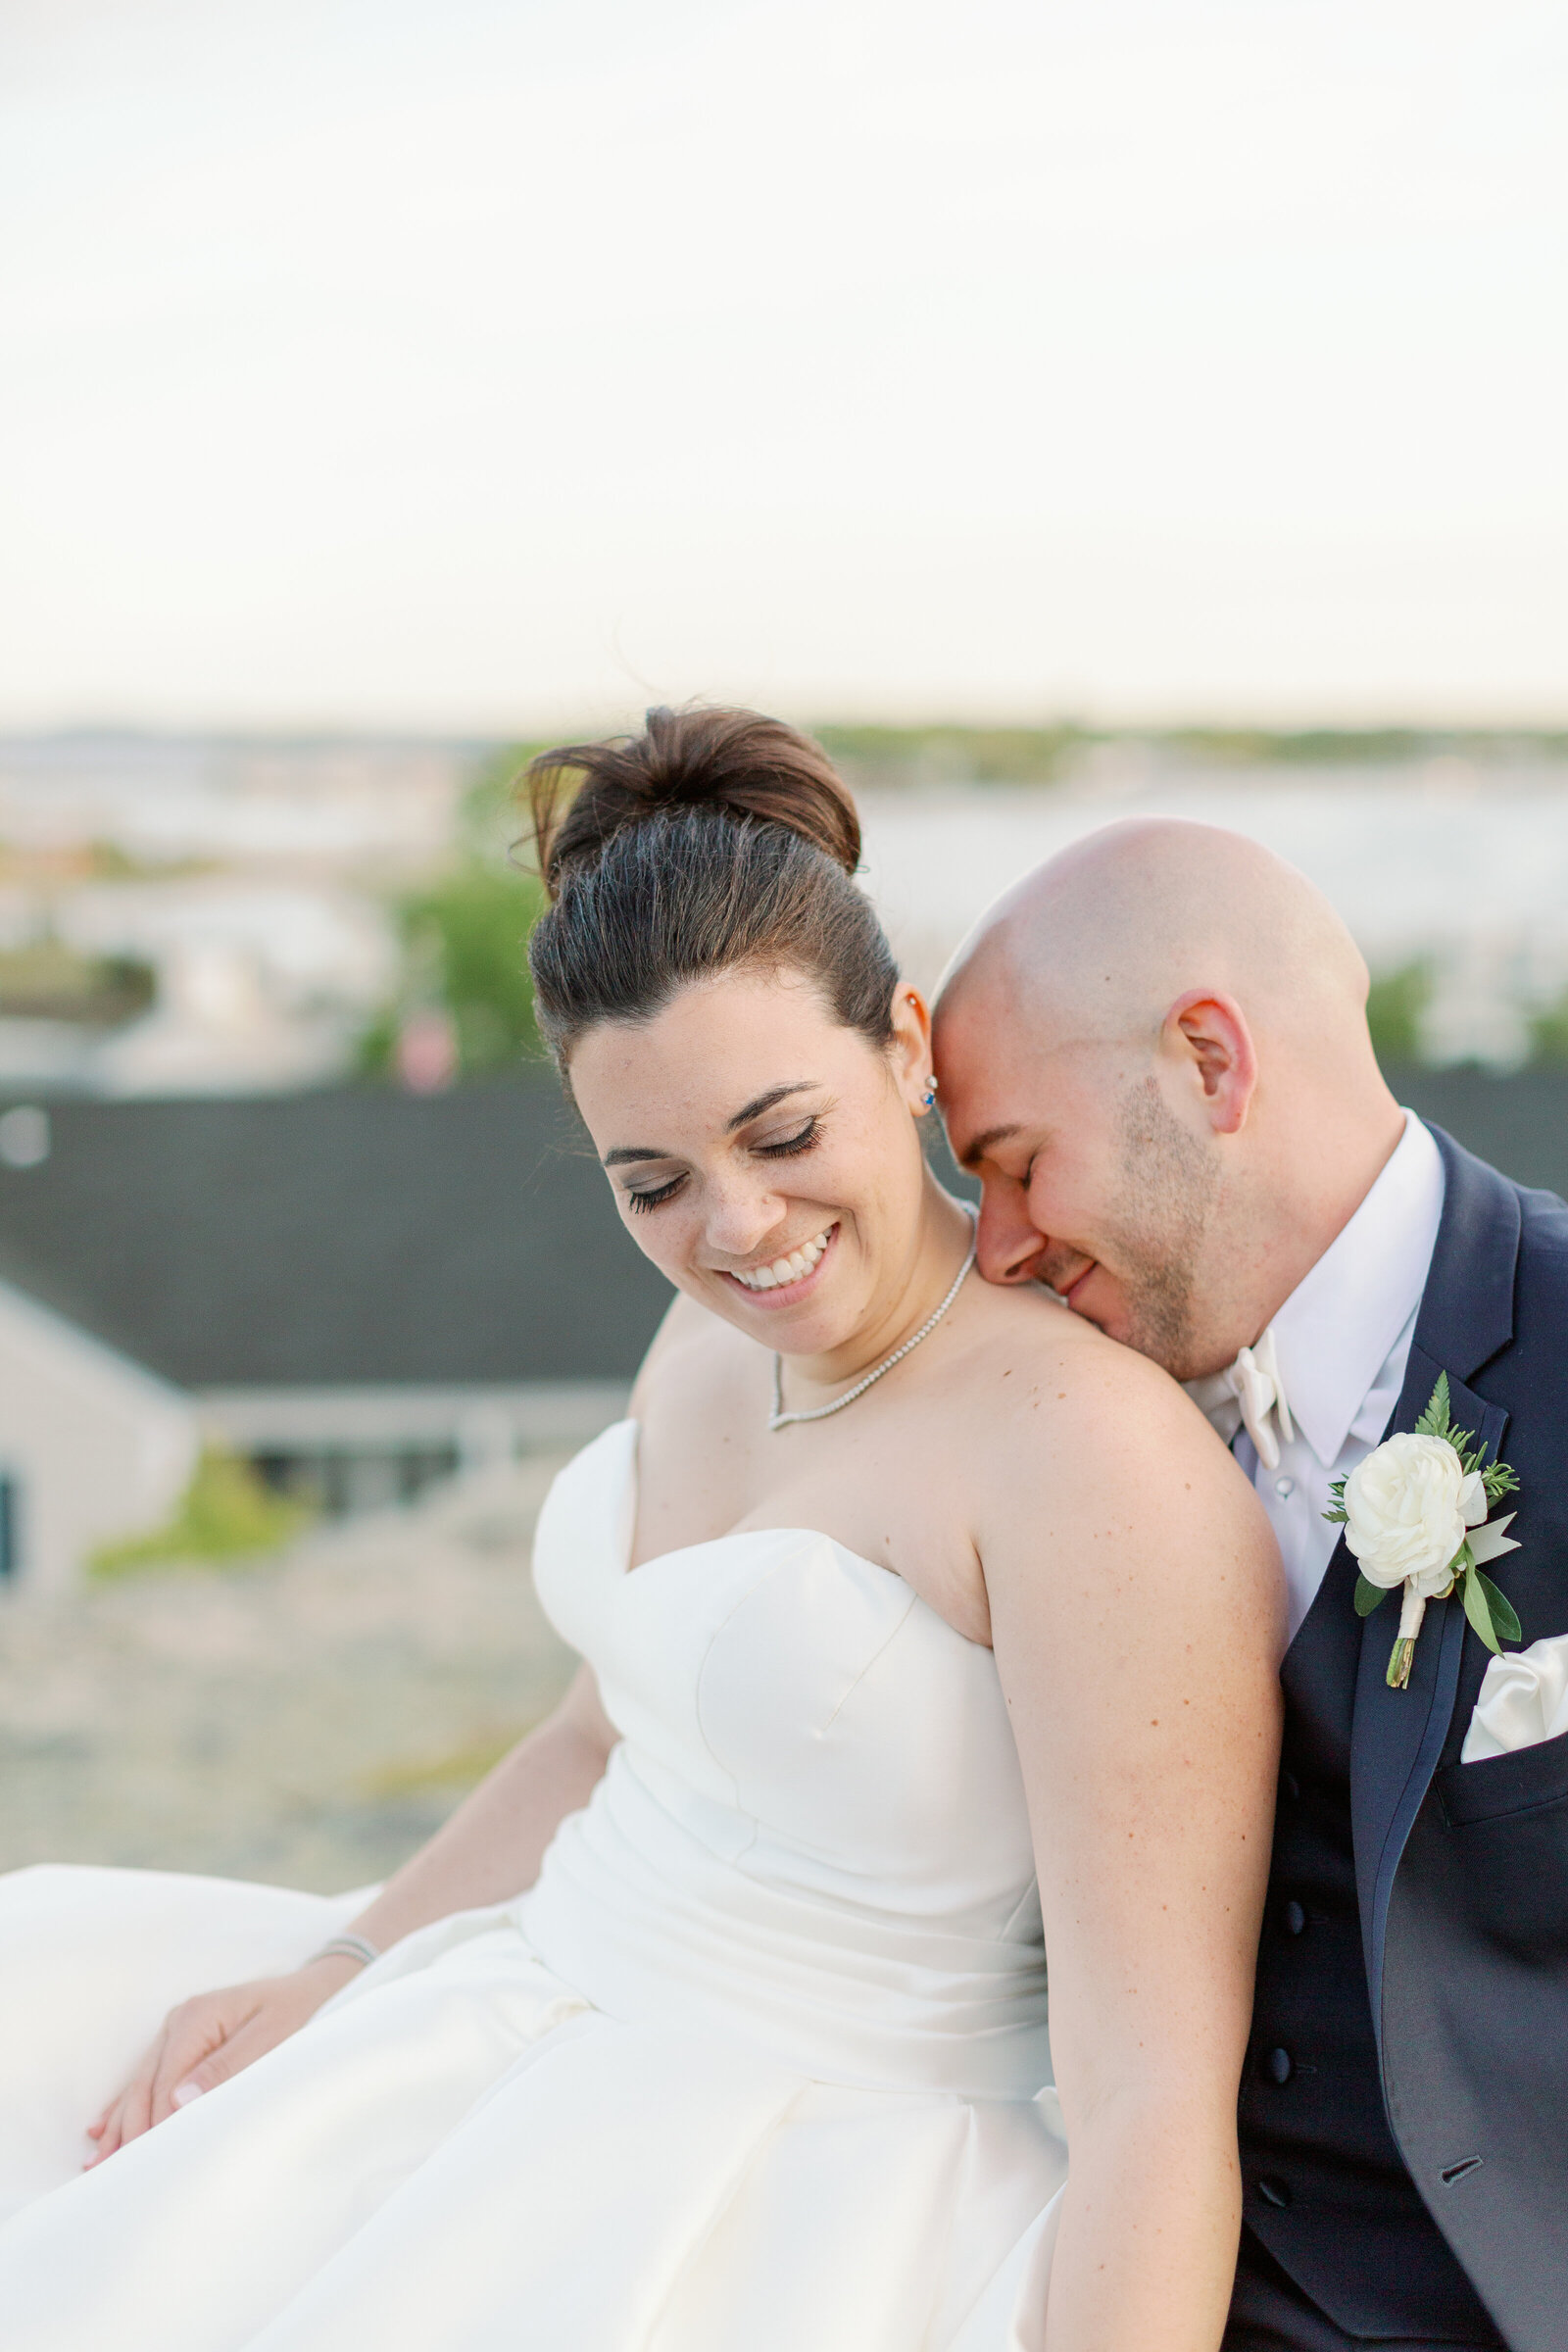 A bride and groom sitting together while he rests his head on her shoulder.